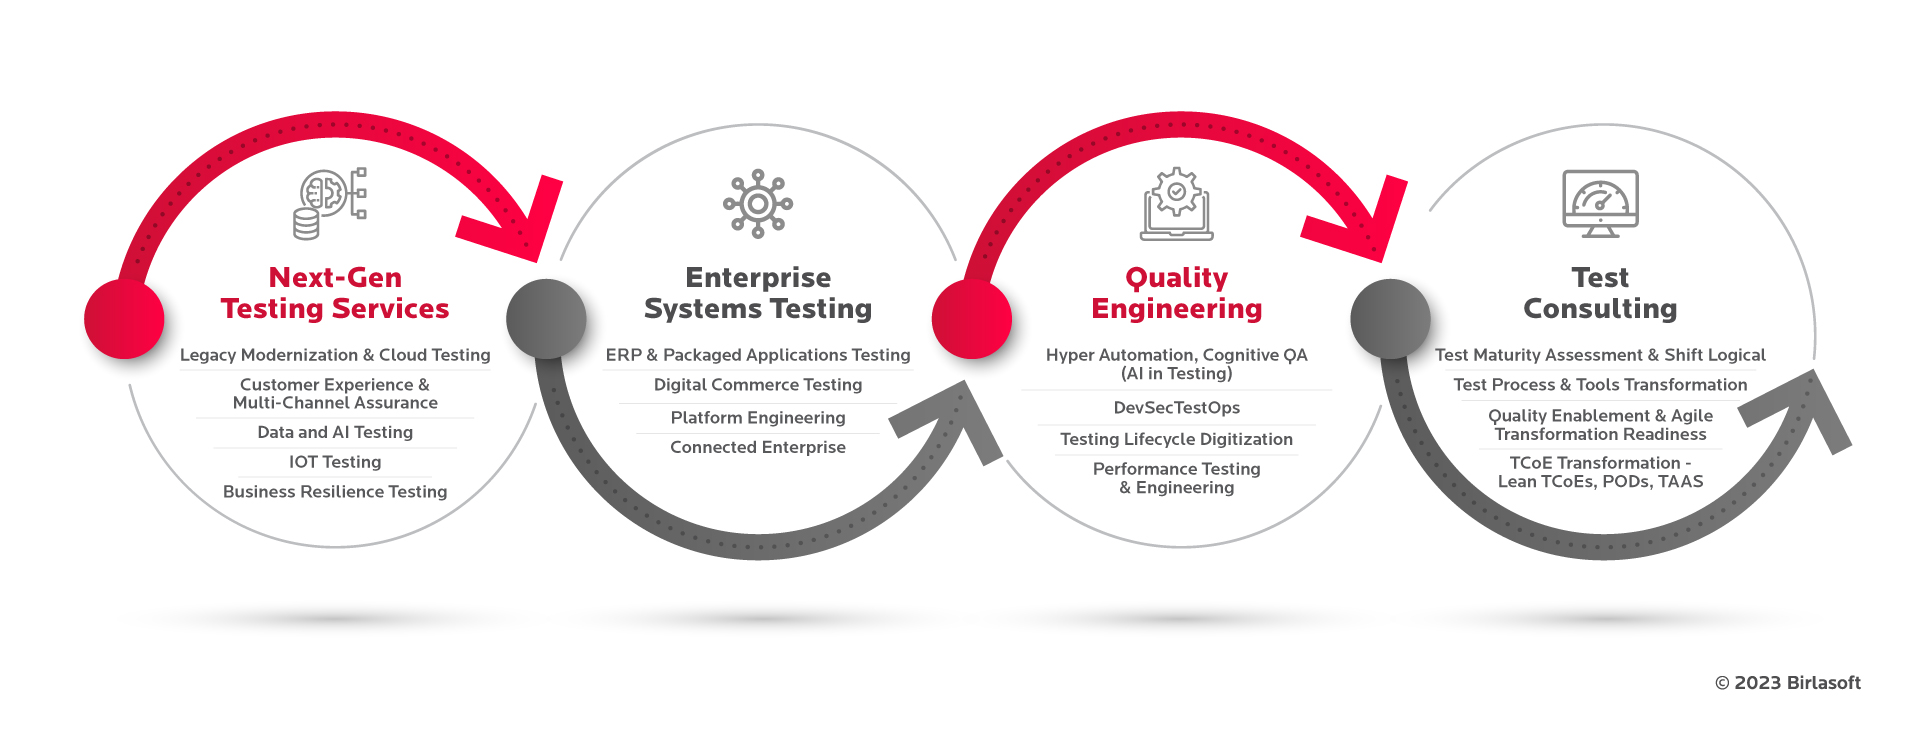 Elevating Business Value with Quality Engineering Excellence - Birlasoft